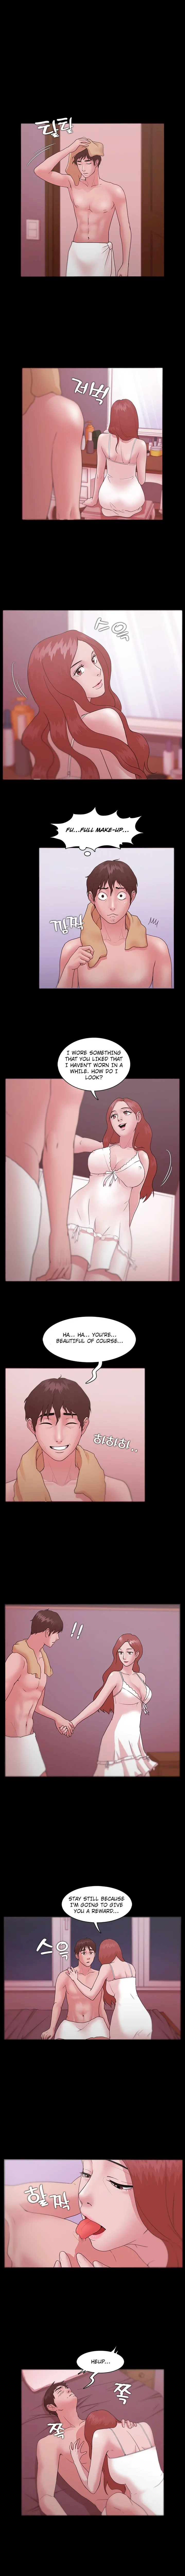 Loser (Team 201) - Chapter 10 Page 7